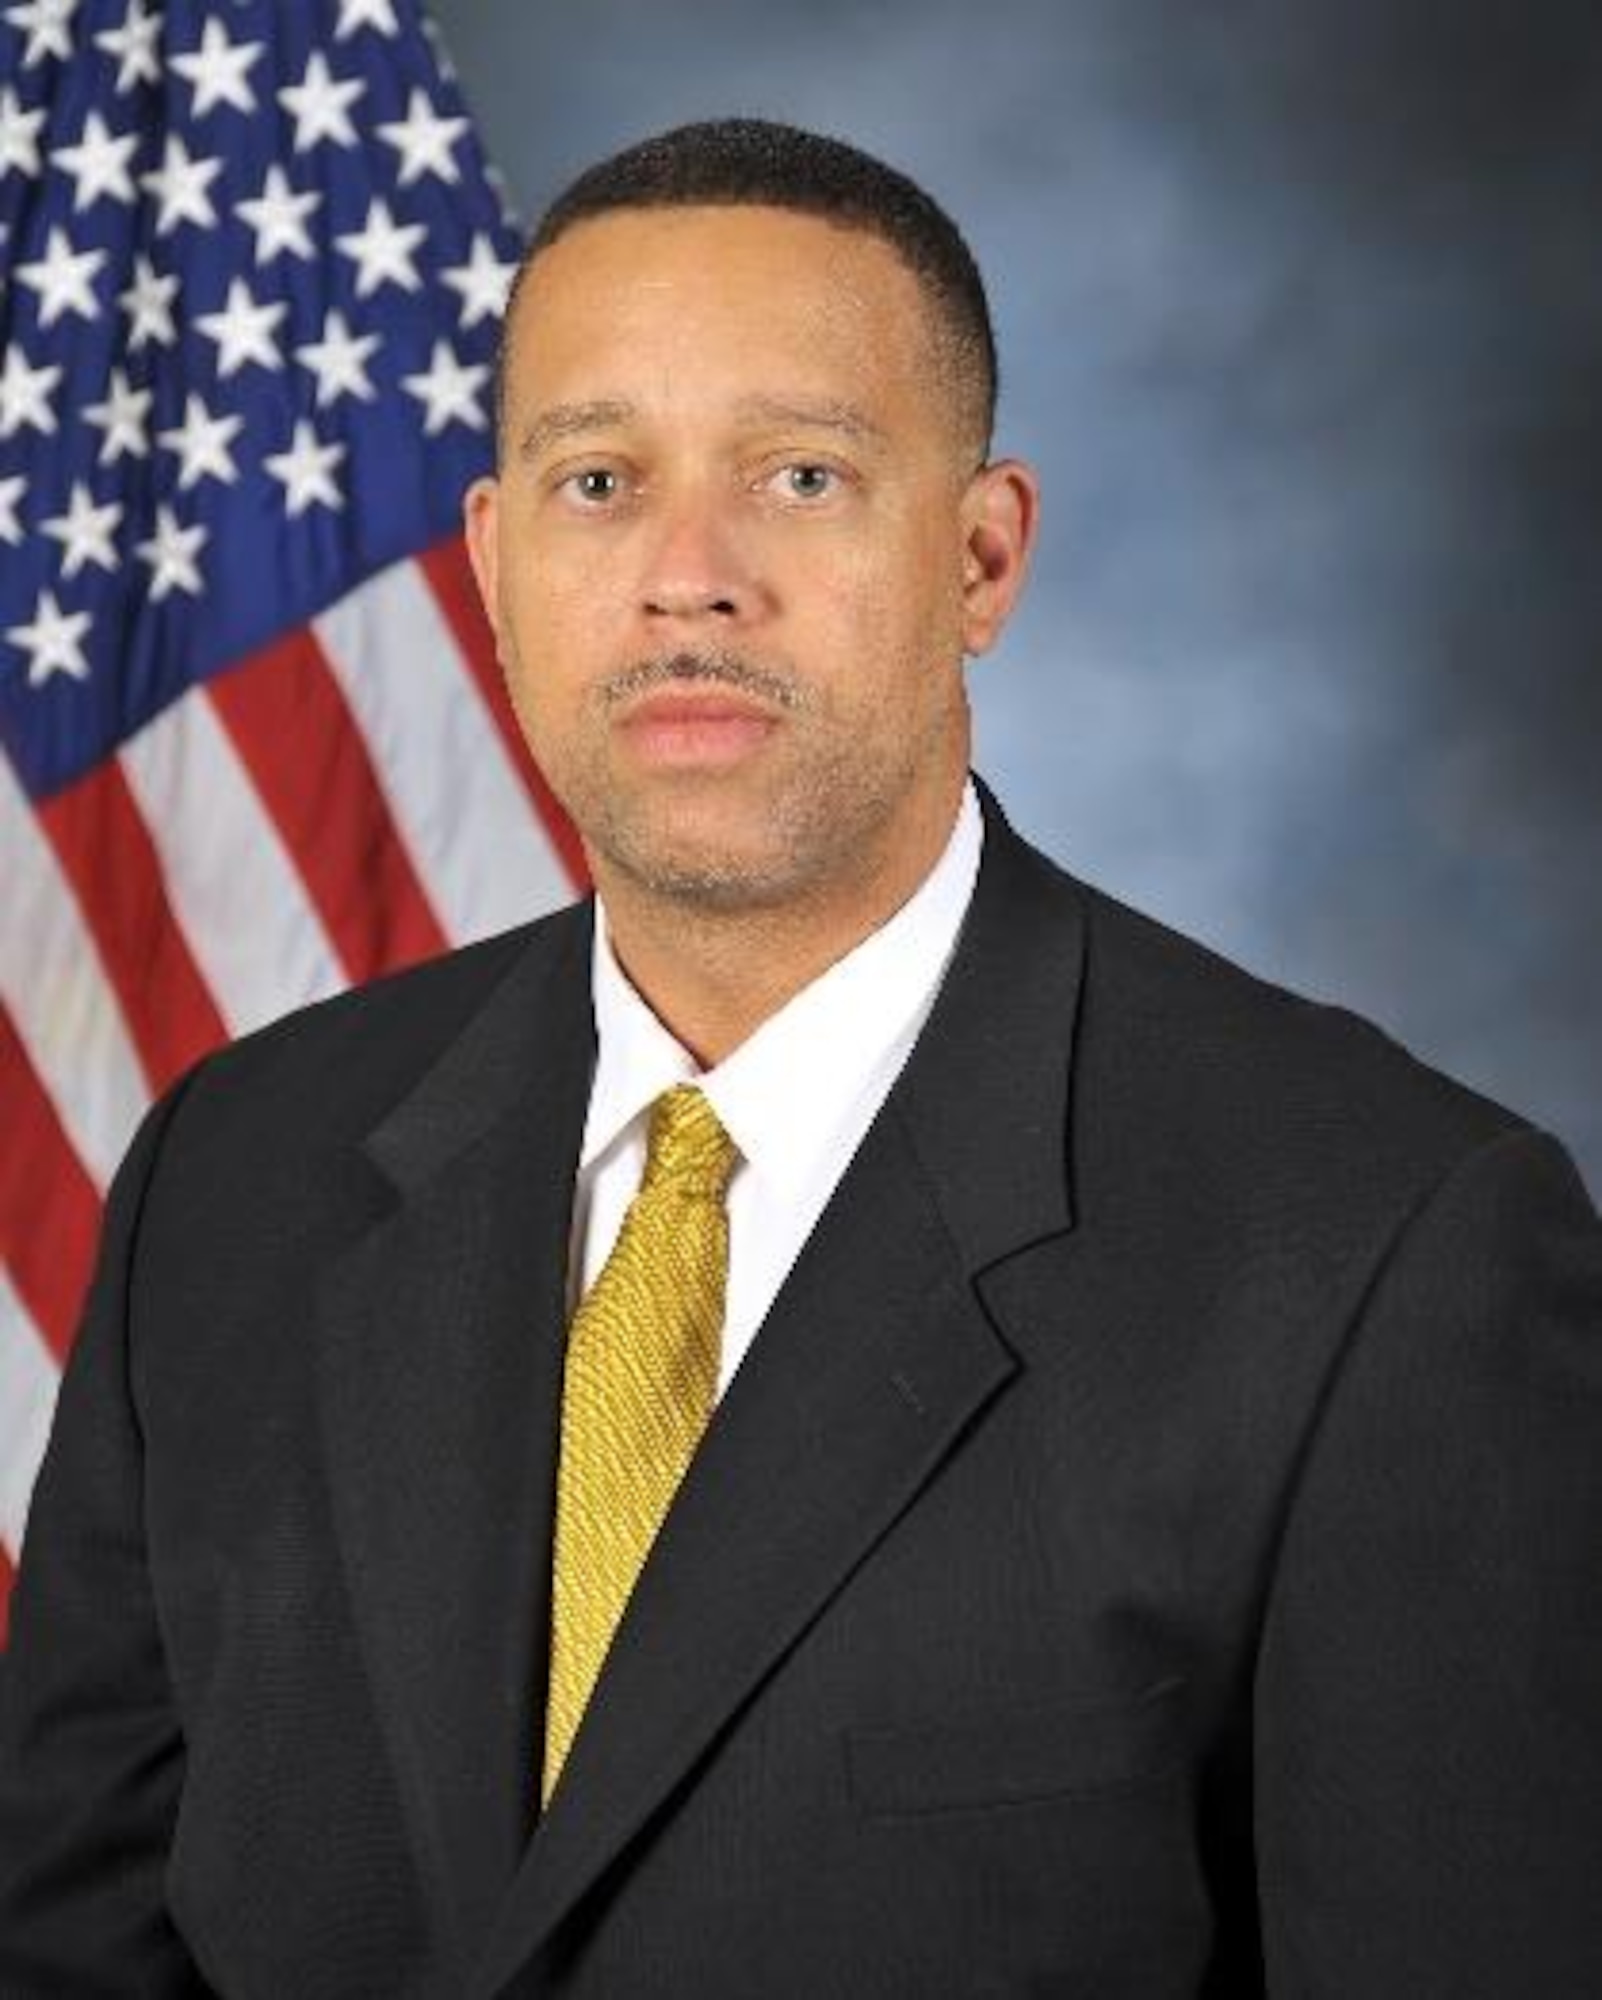 Among his many assignments, SA A.E. Pleasant previously served as the Assistant Special Agent in Charge, OSI – Office of Procurement Fraud, Los Angeles Air Force Base, Calif., where he managed high-level investigations involving Top 100 Prime Contractor employees and U.S. Department of Defense personnel connected to multi-billion dollar space equities and missile defense system contracts. (U.S. Air Force photo)